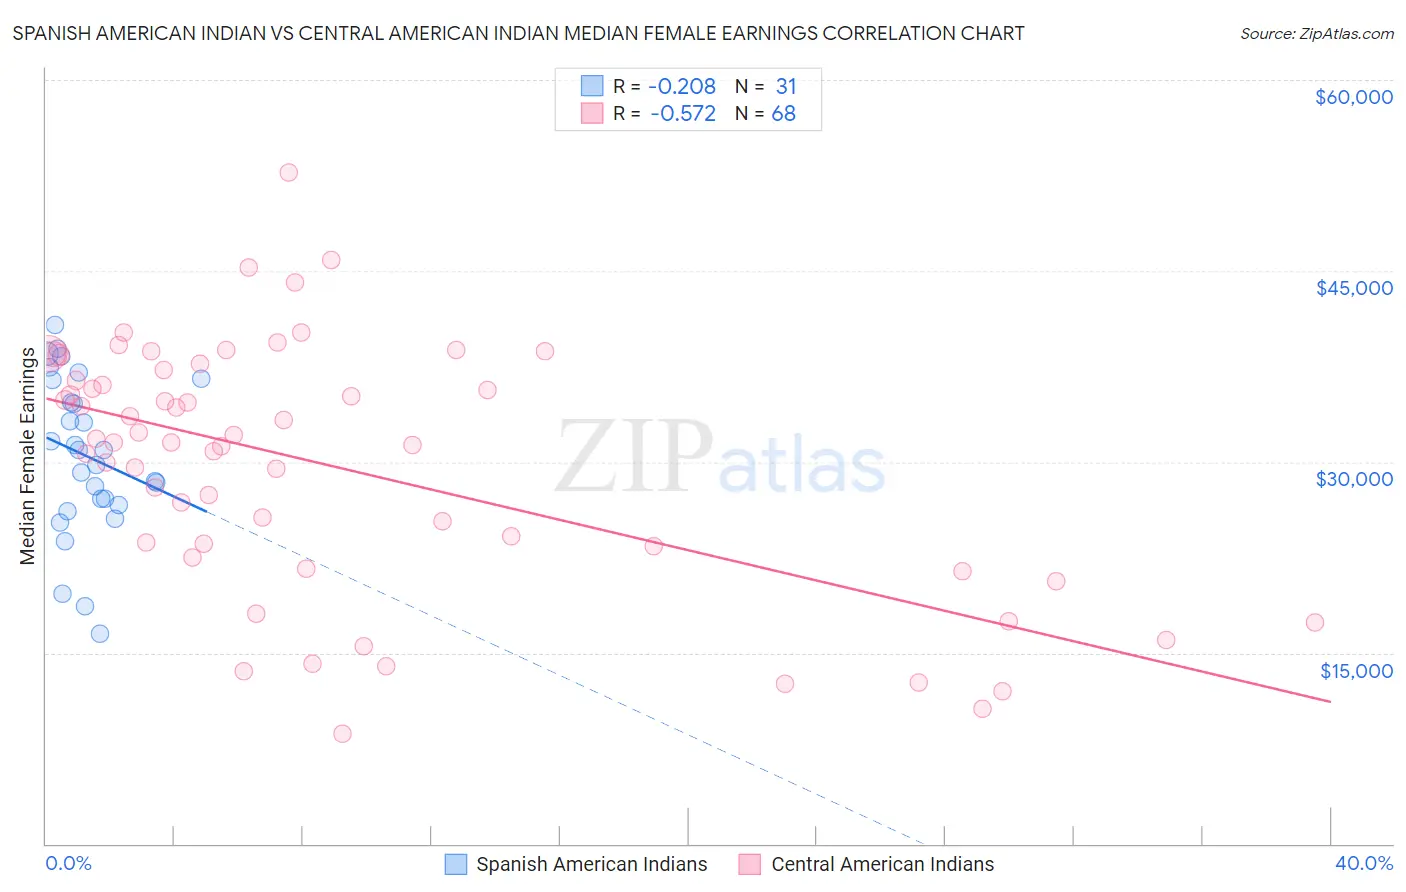 Spanish American Indian vs Central American Indian Median Female Earnings